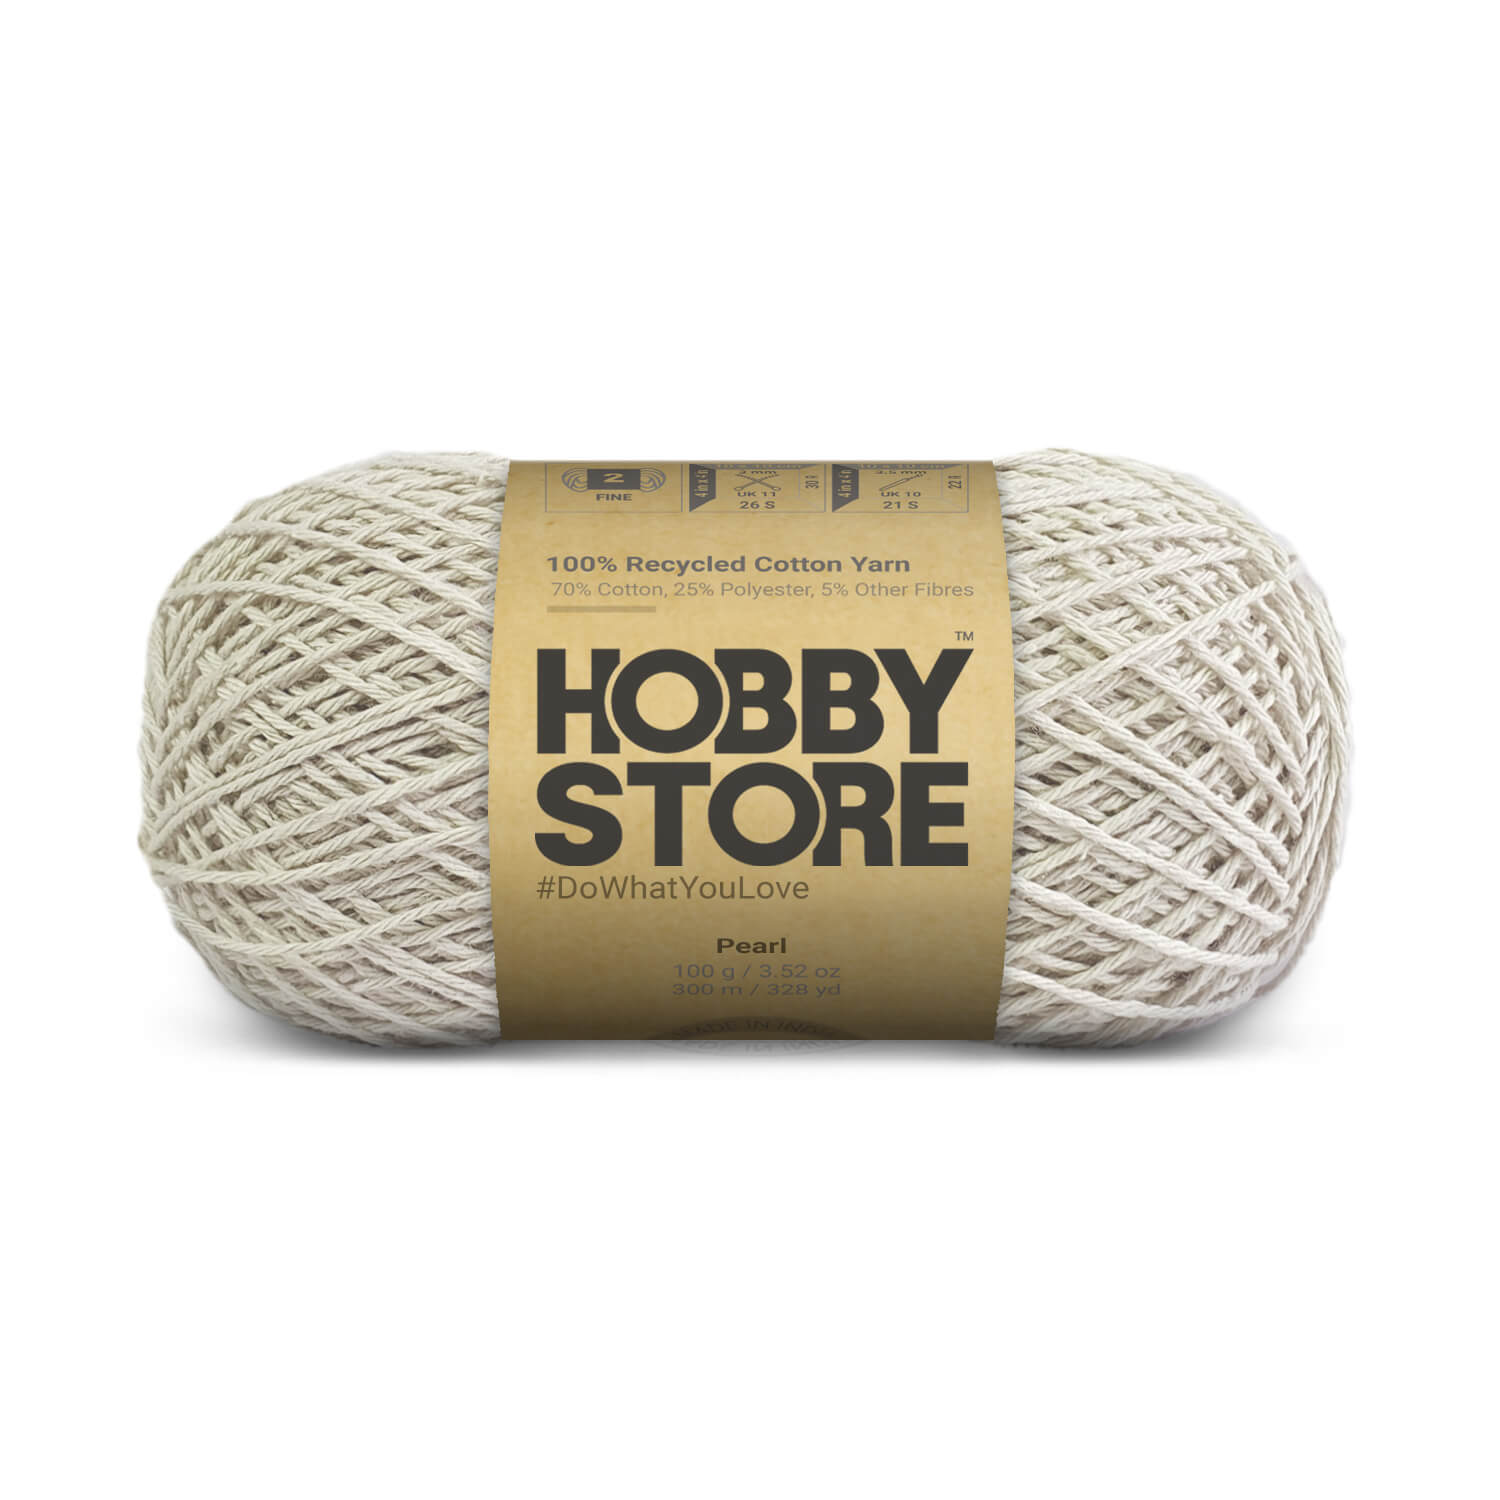 Recycled Cotton Yarn by Hobby Store - Pearl 8311